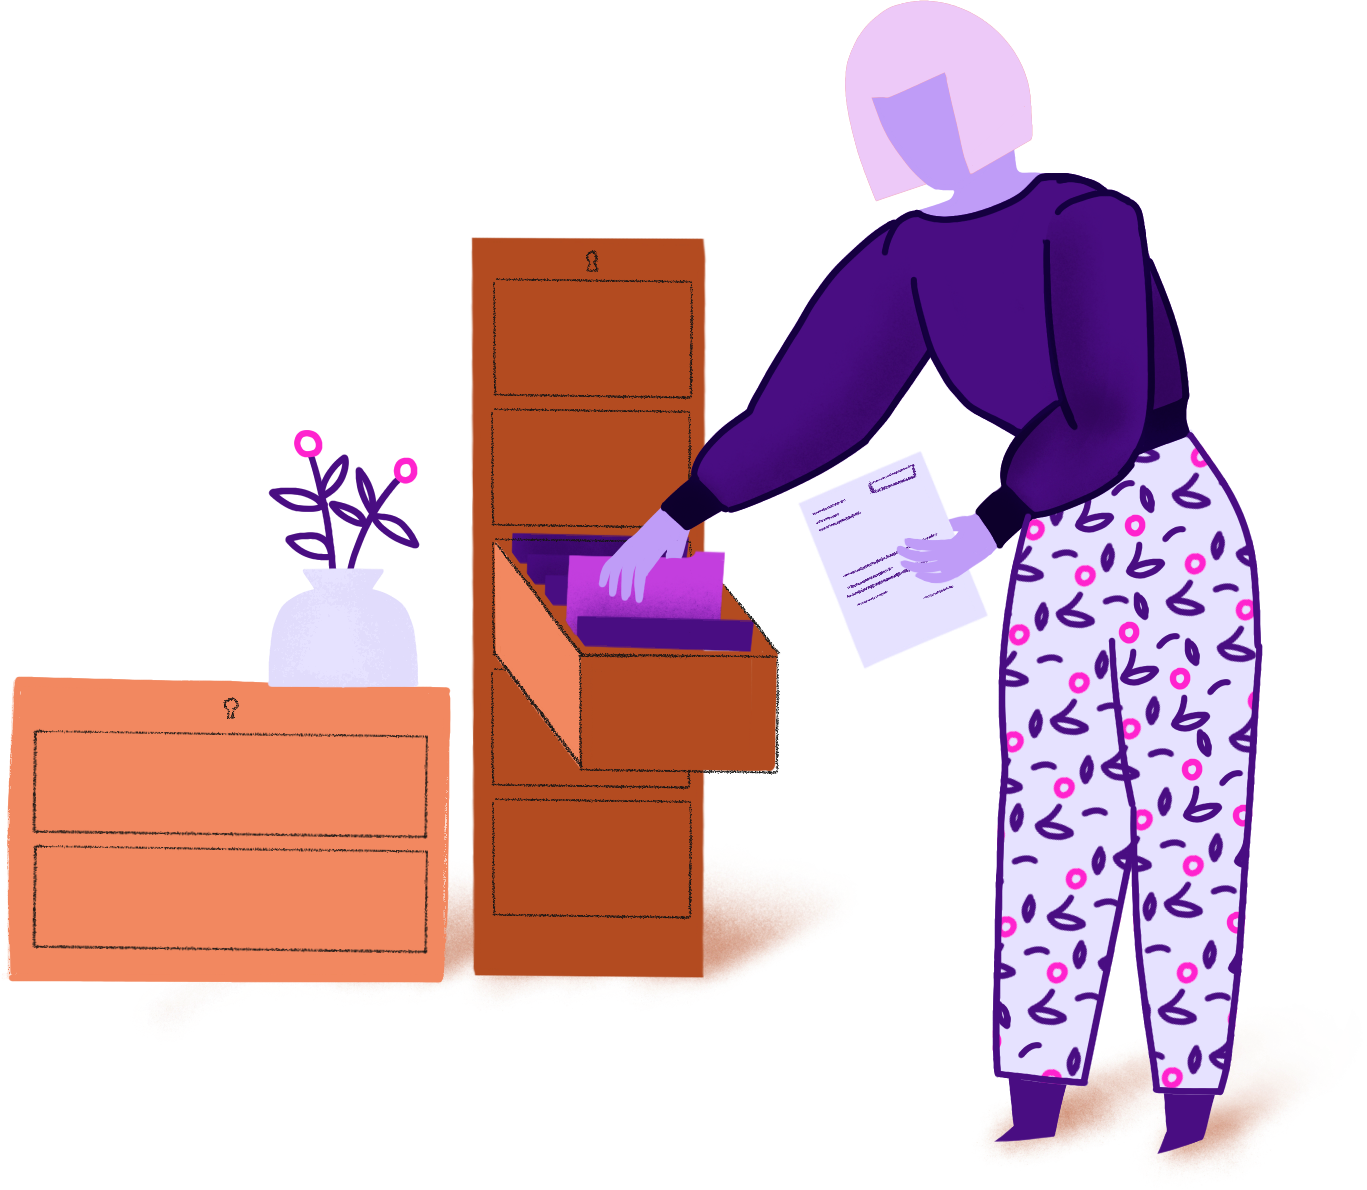 Illustration depicting a person searching for documents in a filing cabinet